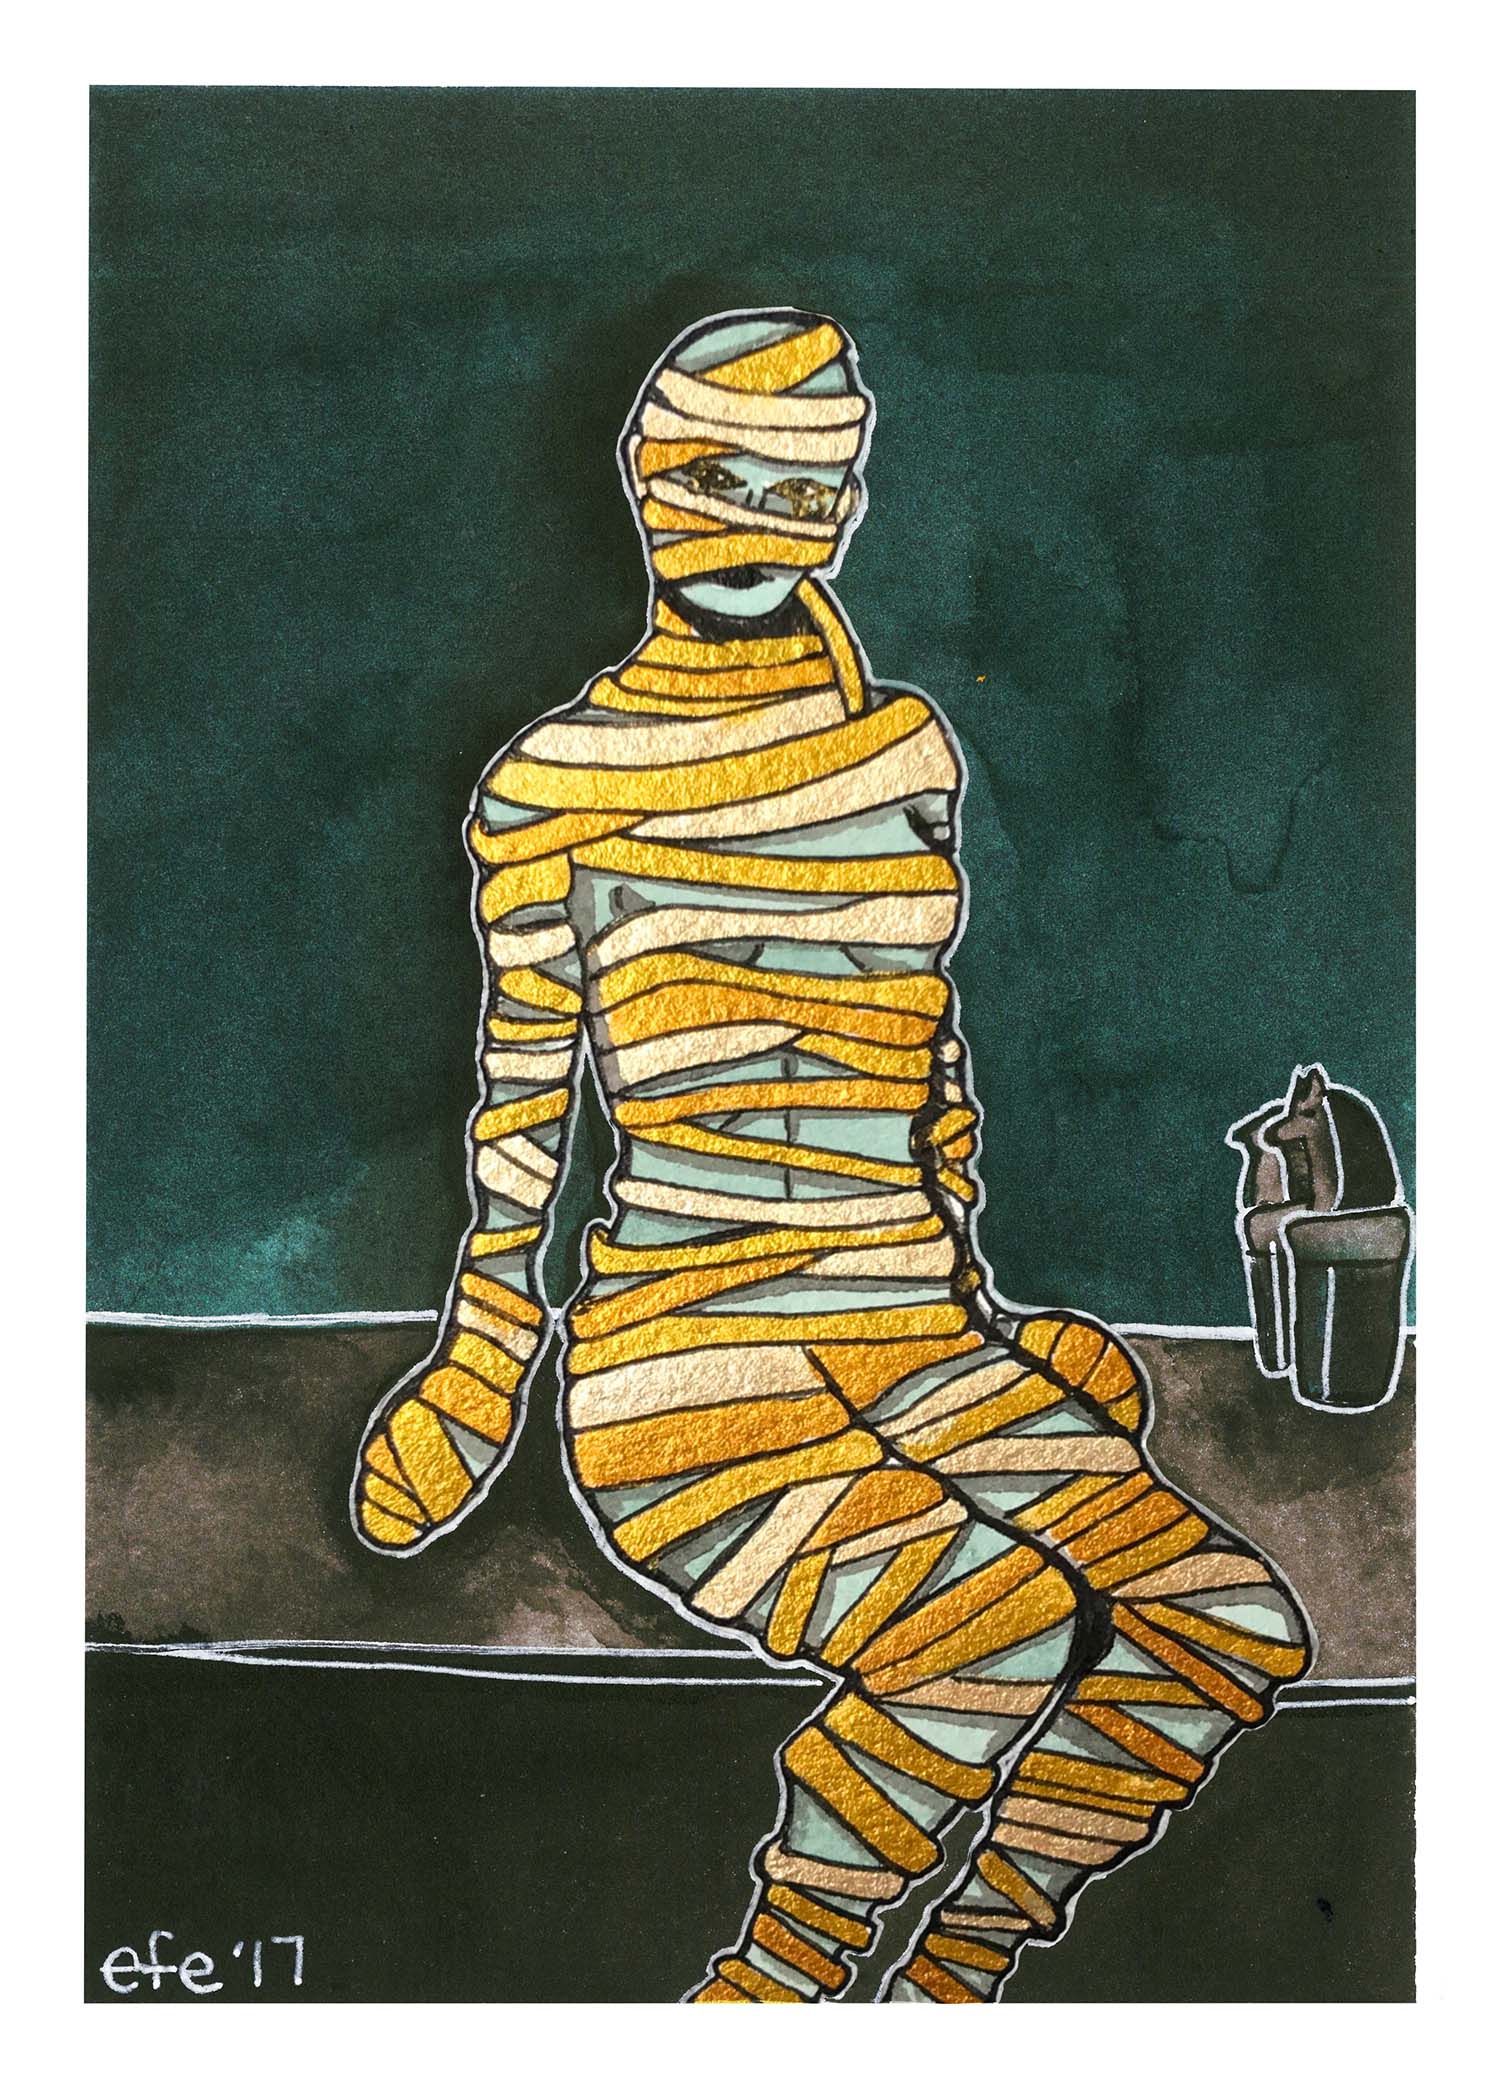 Day 23 - Some Words with a Mummy